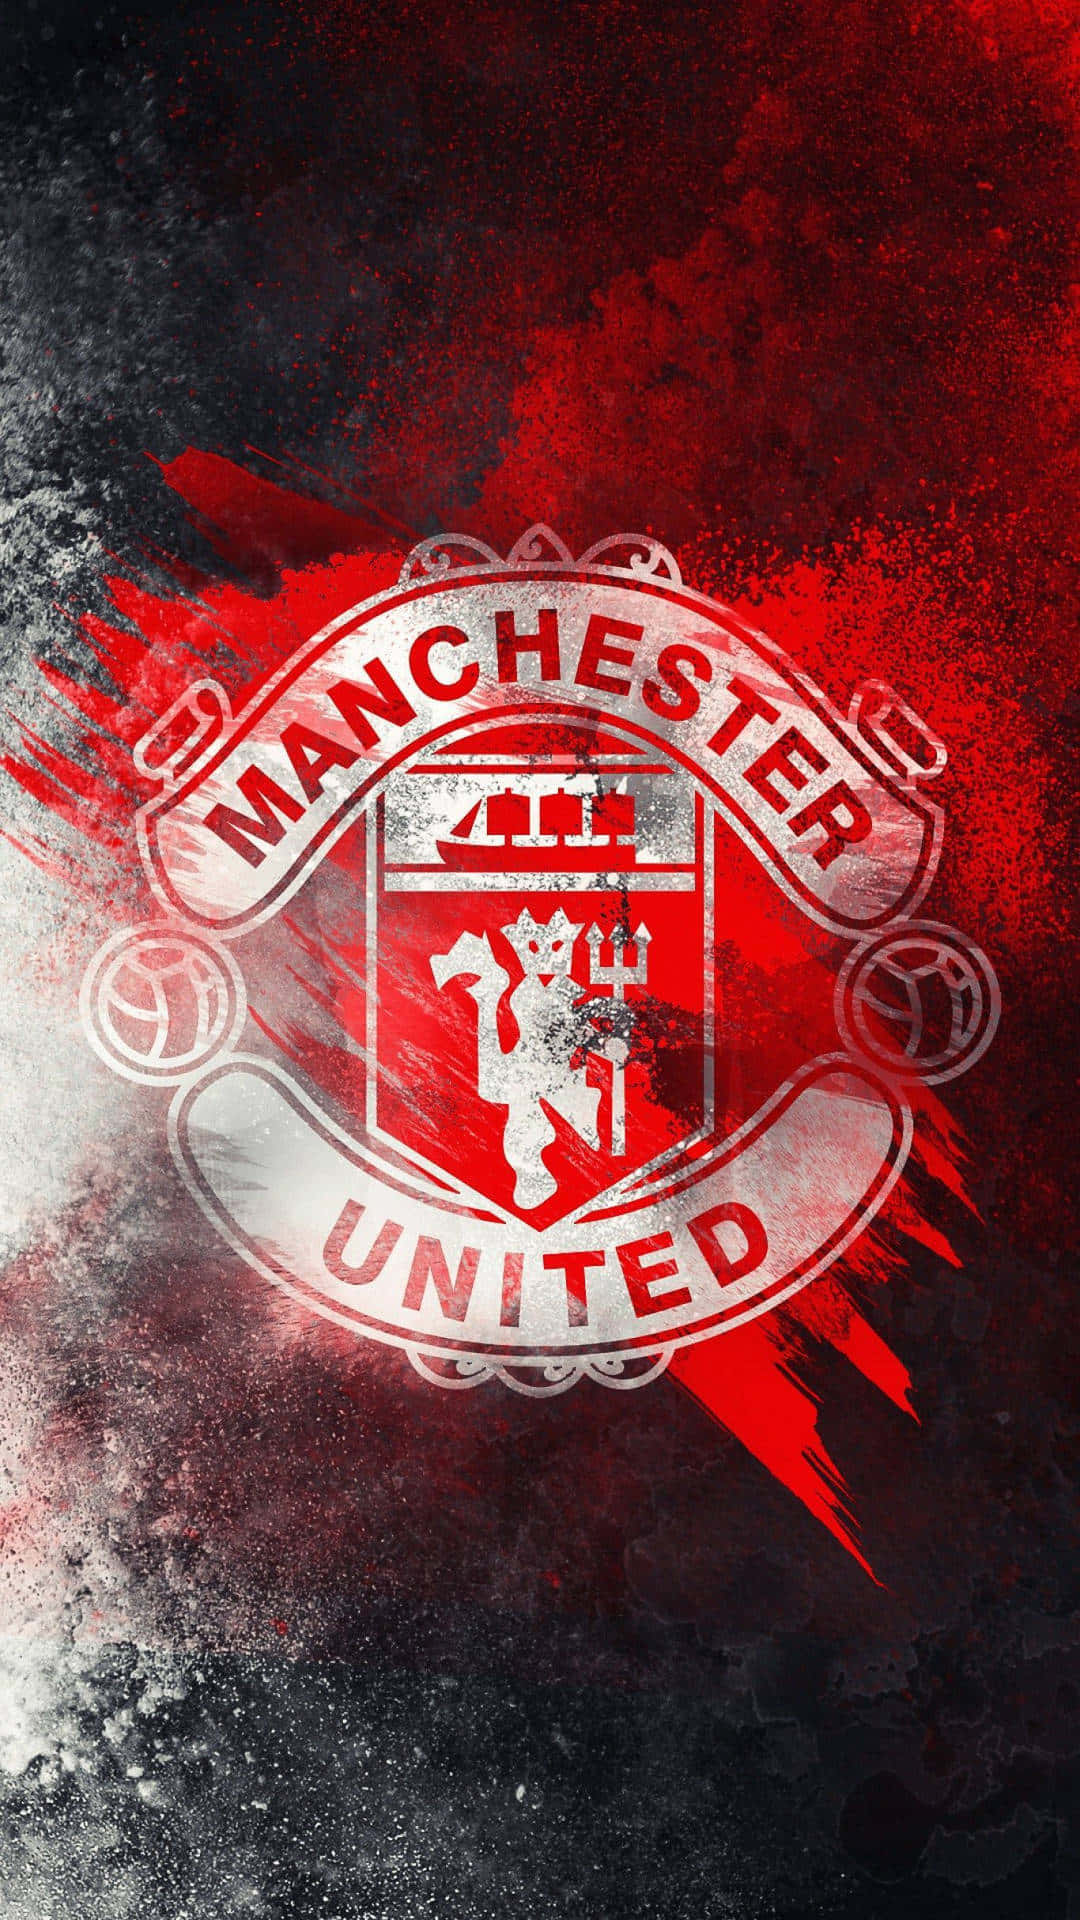 "Manchester United: The Pride of England"